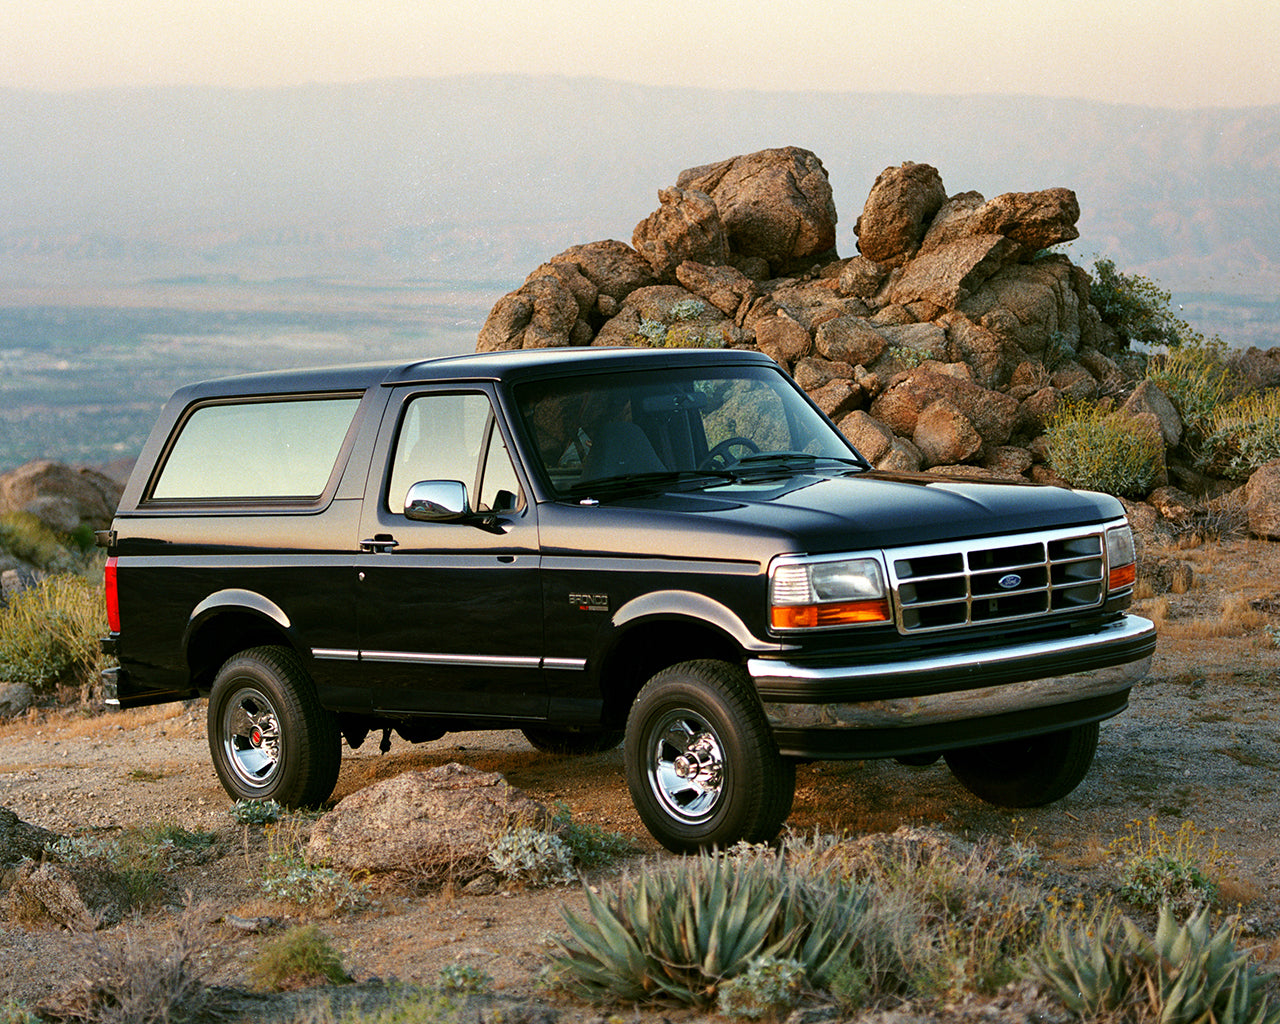 Black Ford Bronco parked on a cliff in front of a mound of rocks and a mountain range